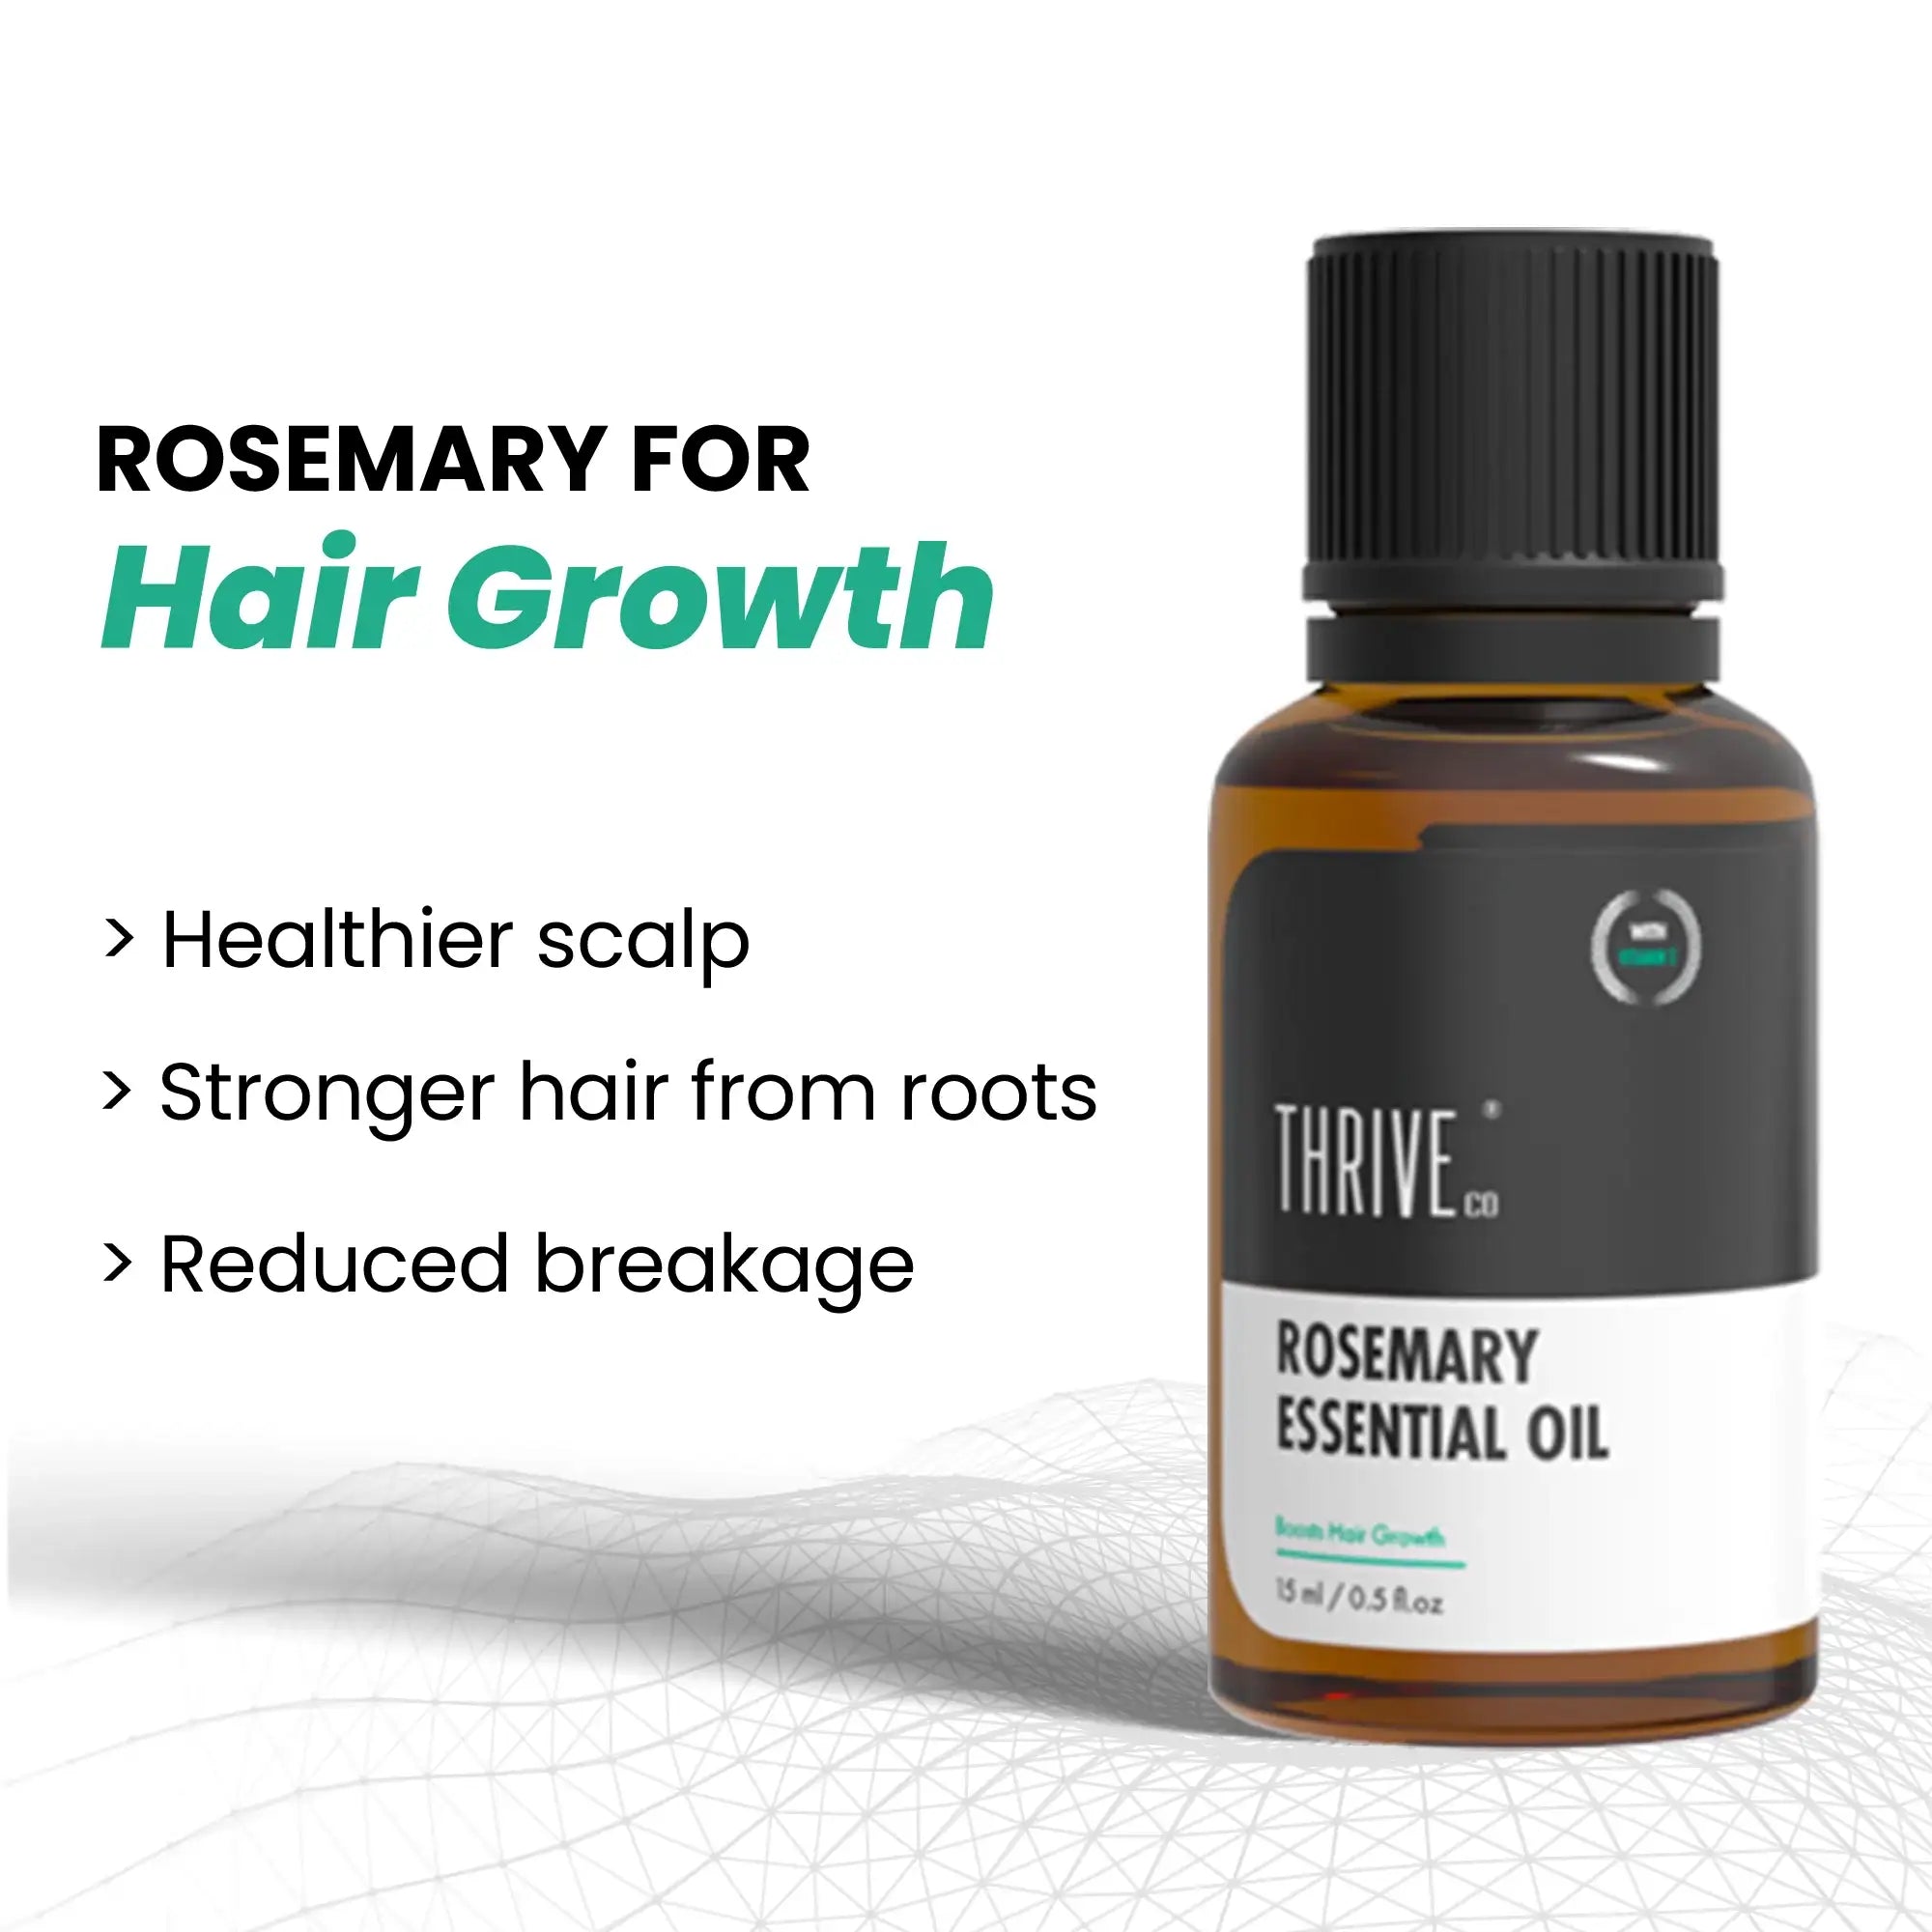 100% Pure Rosemary Essential Oil For Hair Growth | ThriveCo